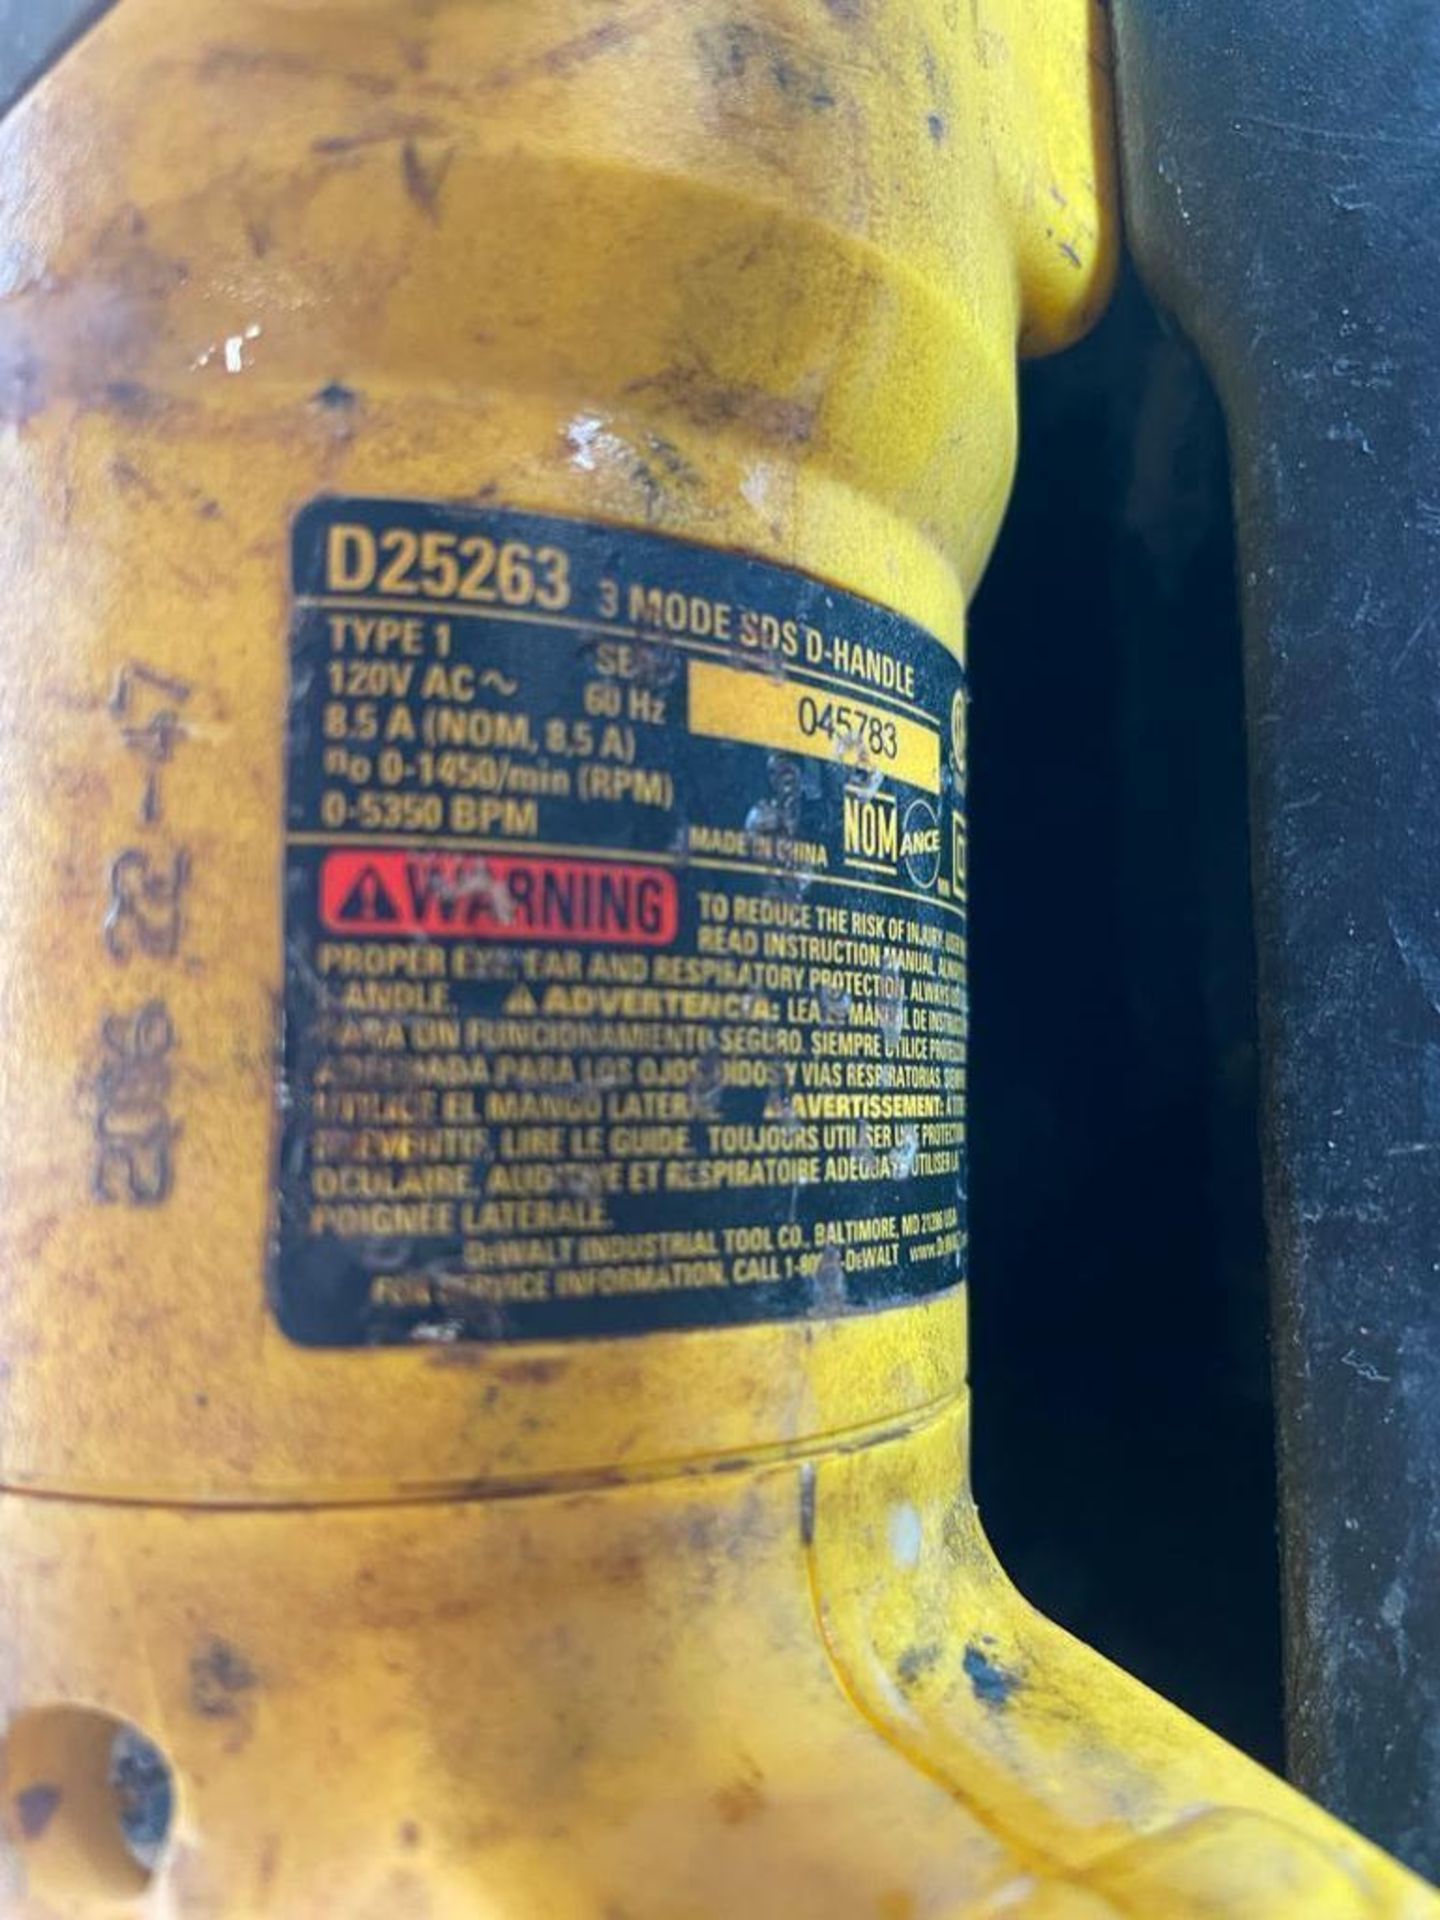 DeWalt D25263 Hammer Drill, Serial #045783, 120V in Case. Located in Hazelwood, MO - Image 4 of 4